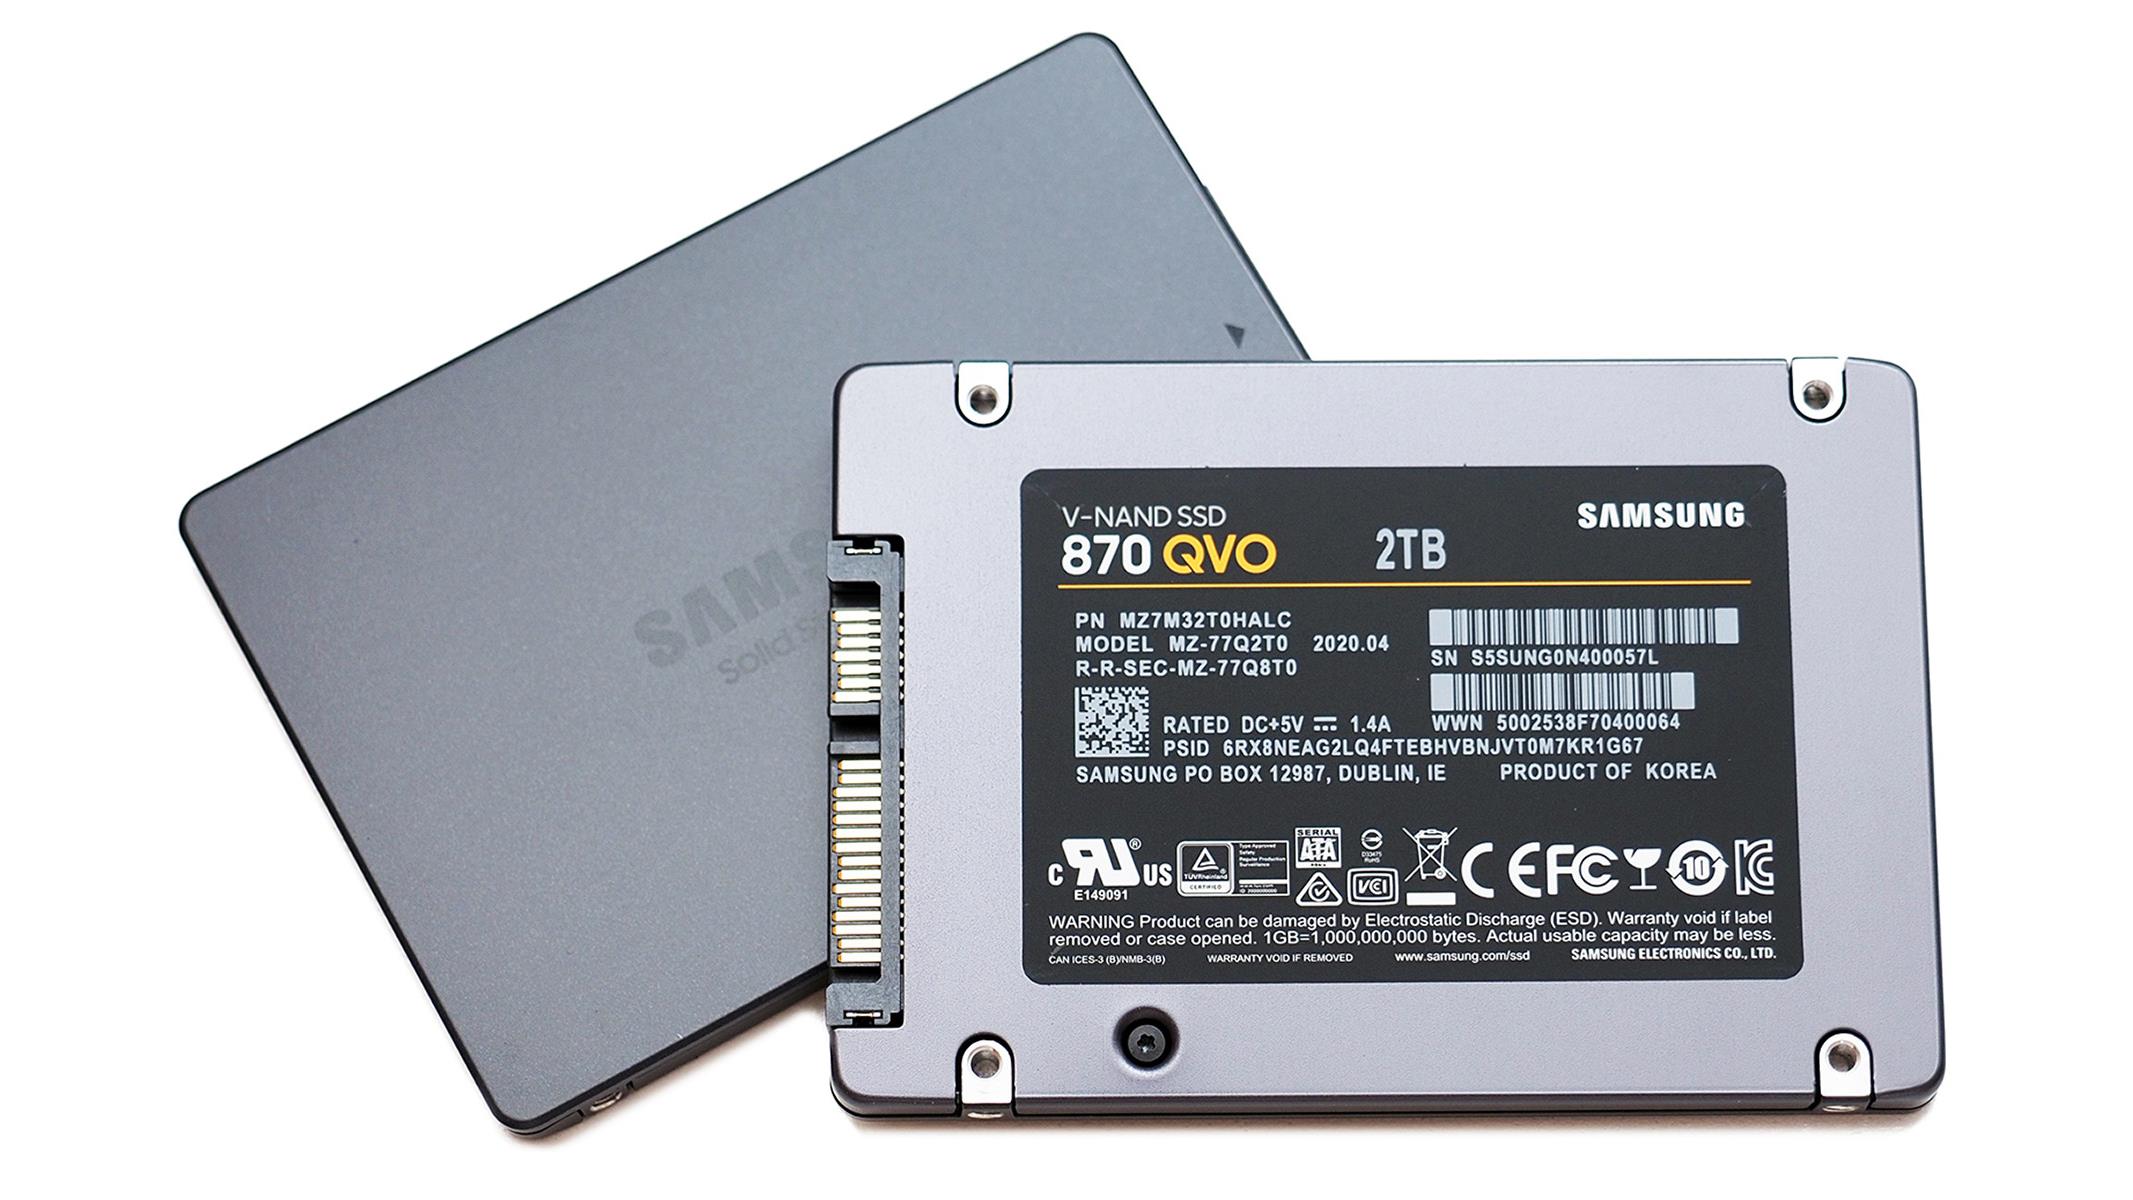 Samsung Ssd 870 Qvo 2tb Ssd Falls To Just 199 Apple Airpods Pro Hit Lowest Price Ever Hothardware